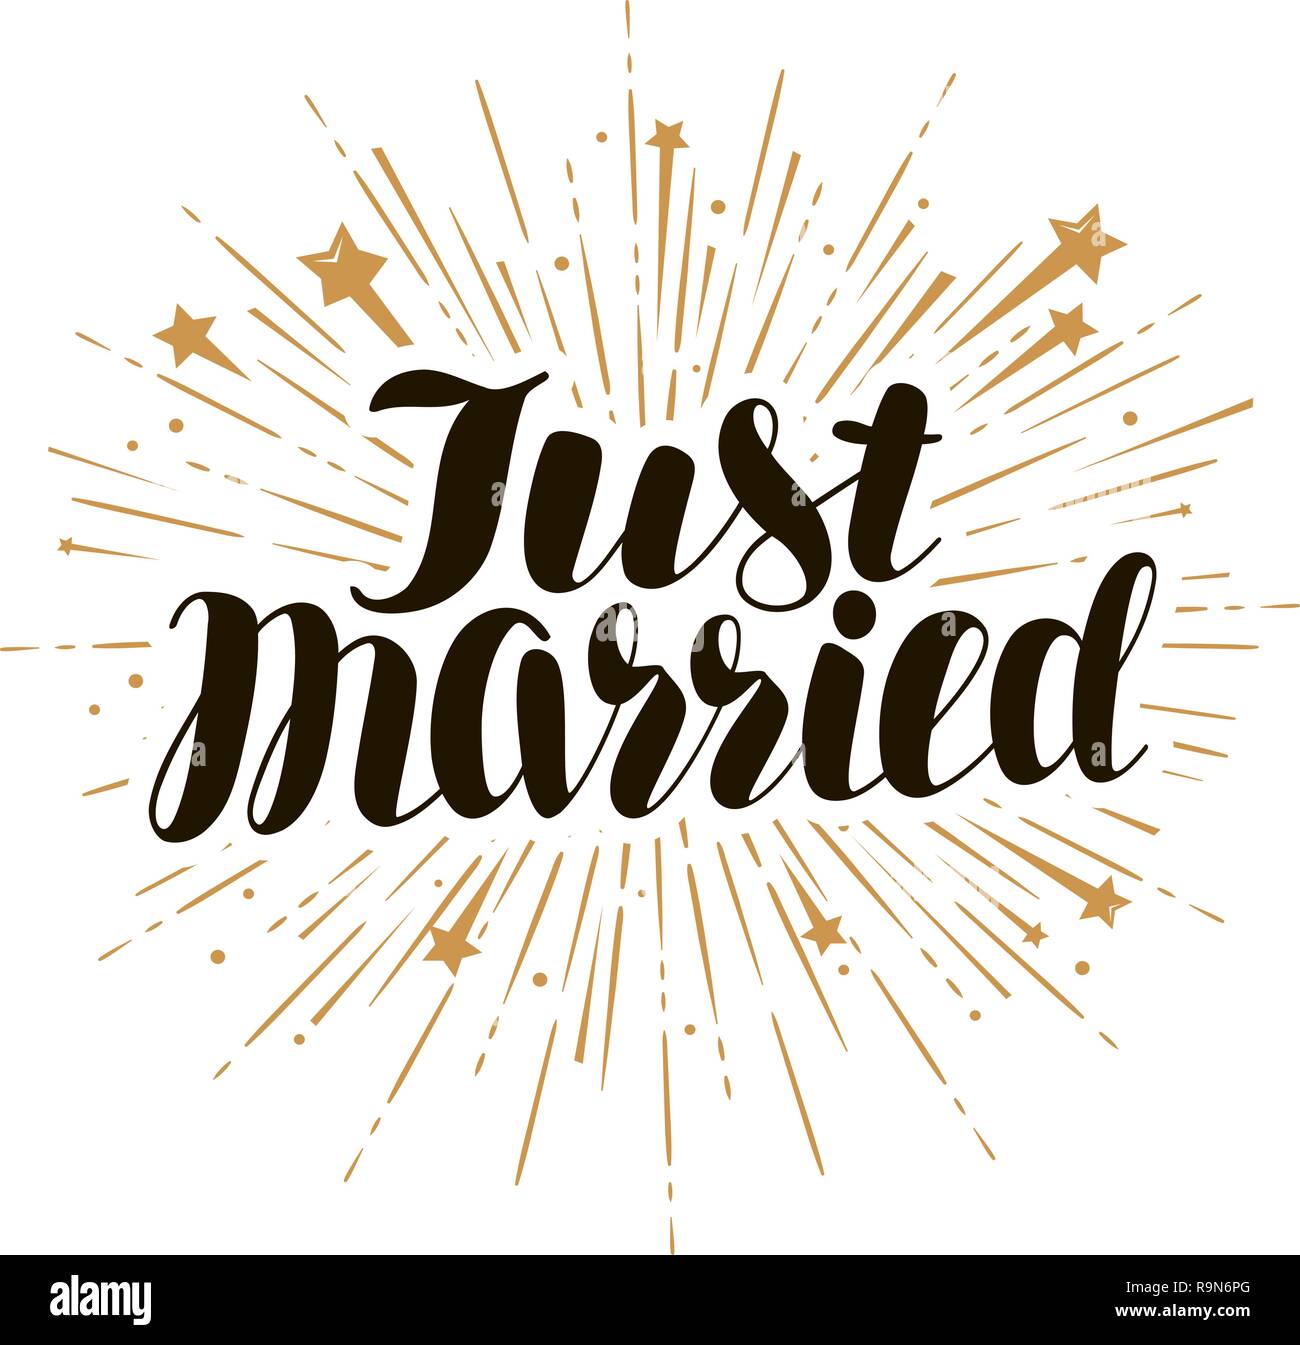 Just married, lettering. Marry, wedding card and invitation. Calligraphy, vector illustration Stock Vector